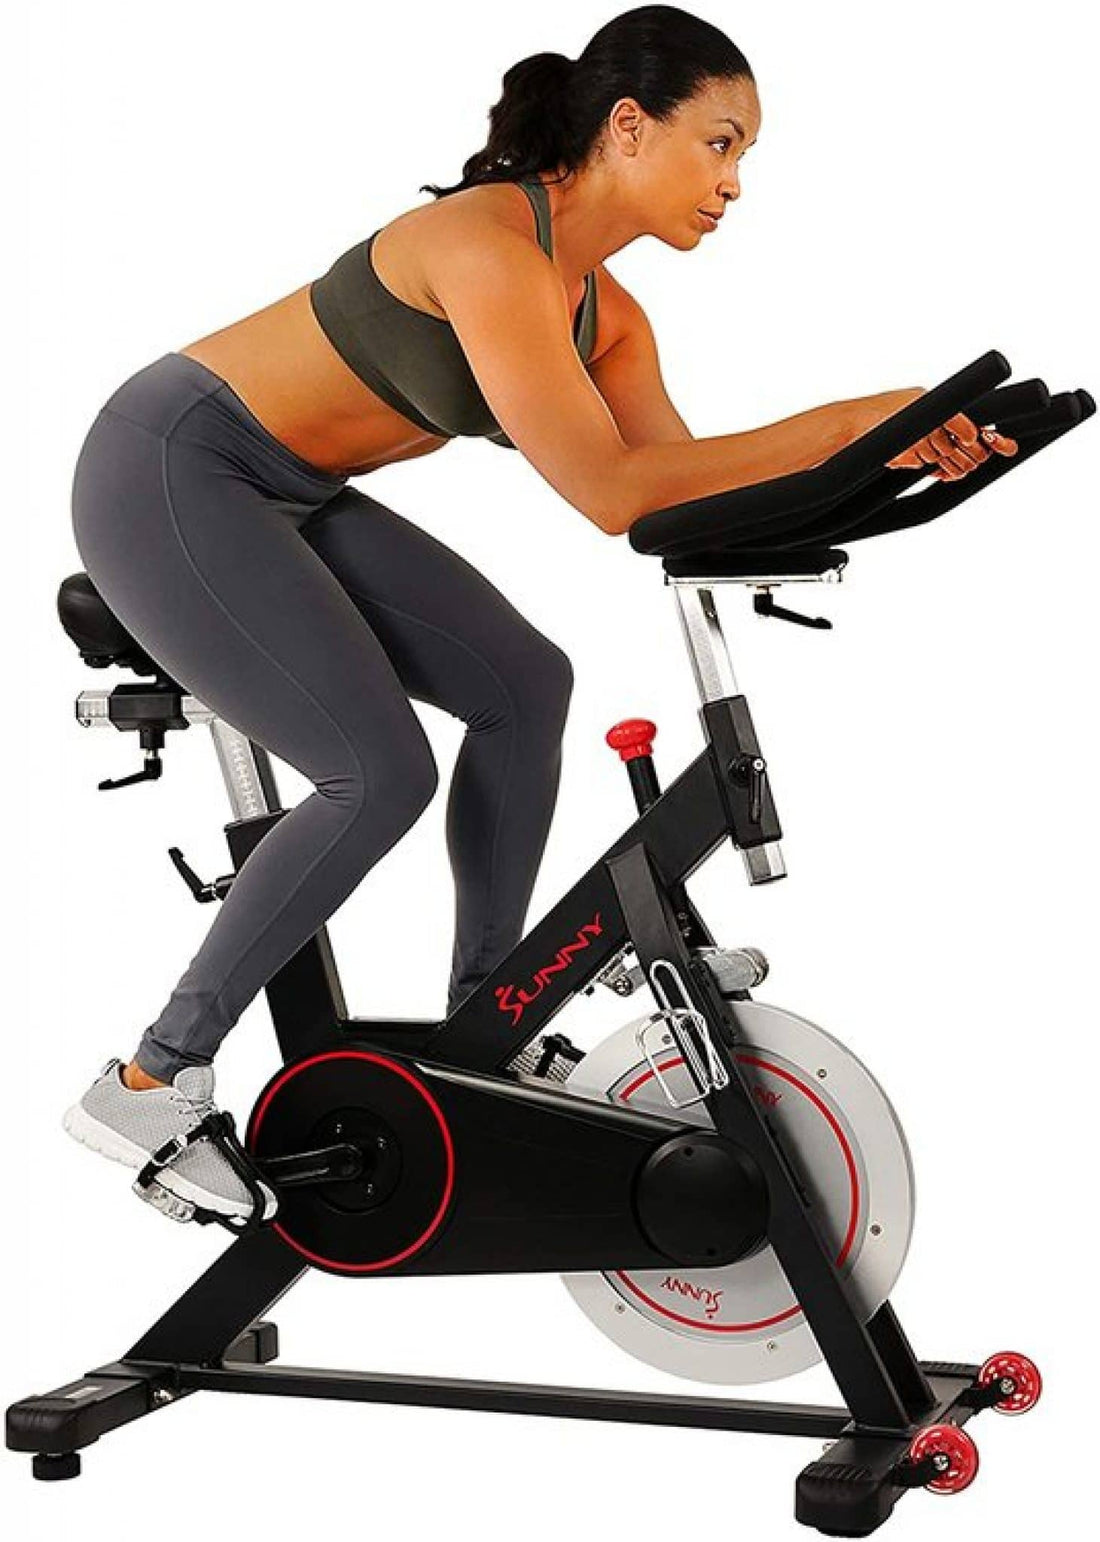 Does your exercise routine need a boost? A spin bike will do the trick without draining your pockets